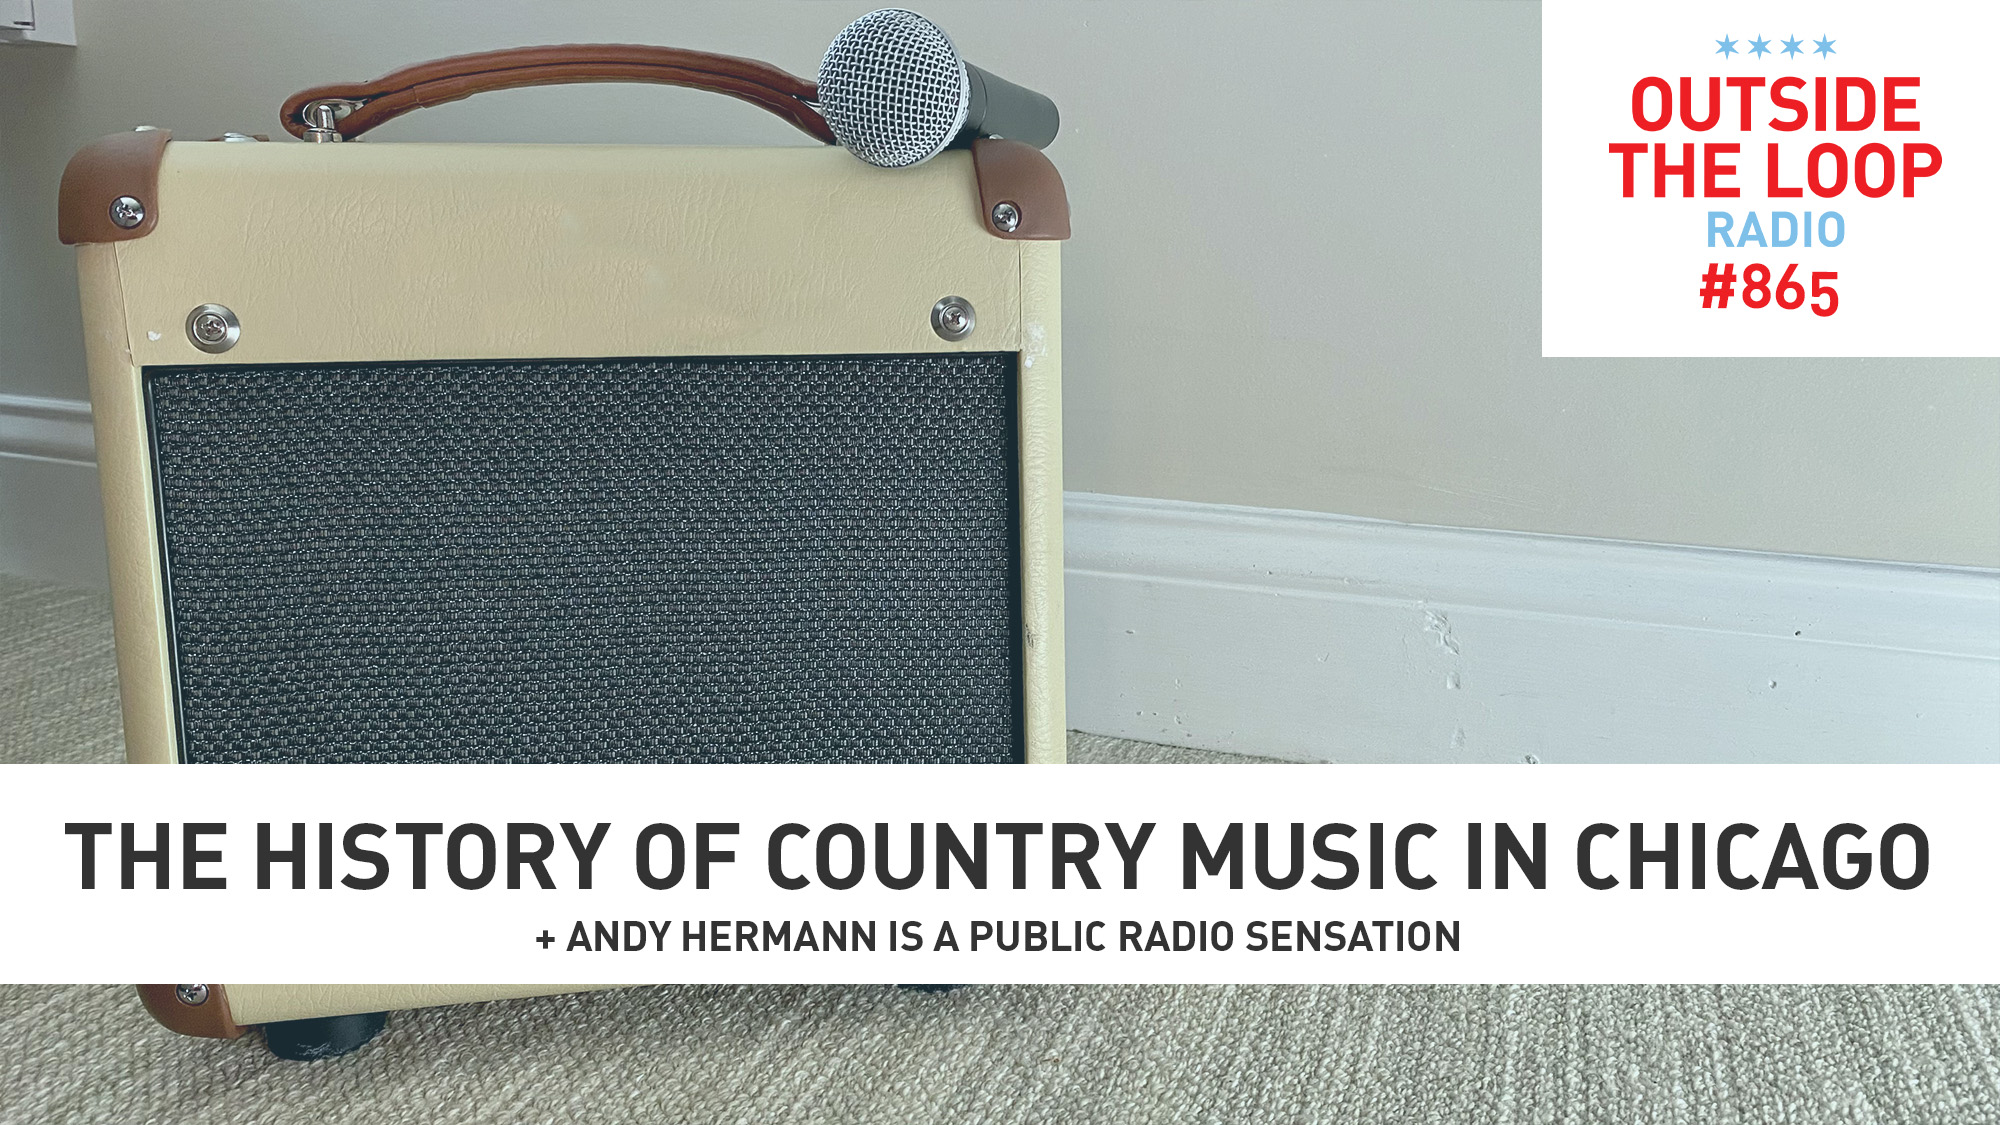 This week we explore the history of country music in Chicago. (Photo credit: Mike Stephen/WGN Radio)